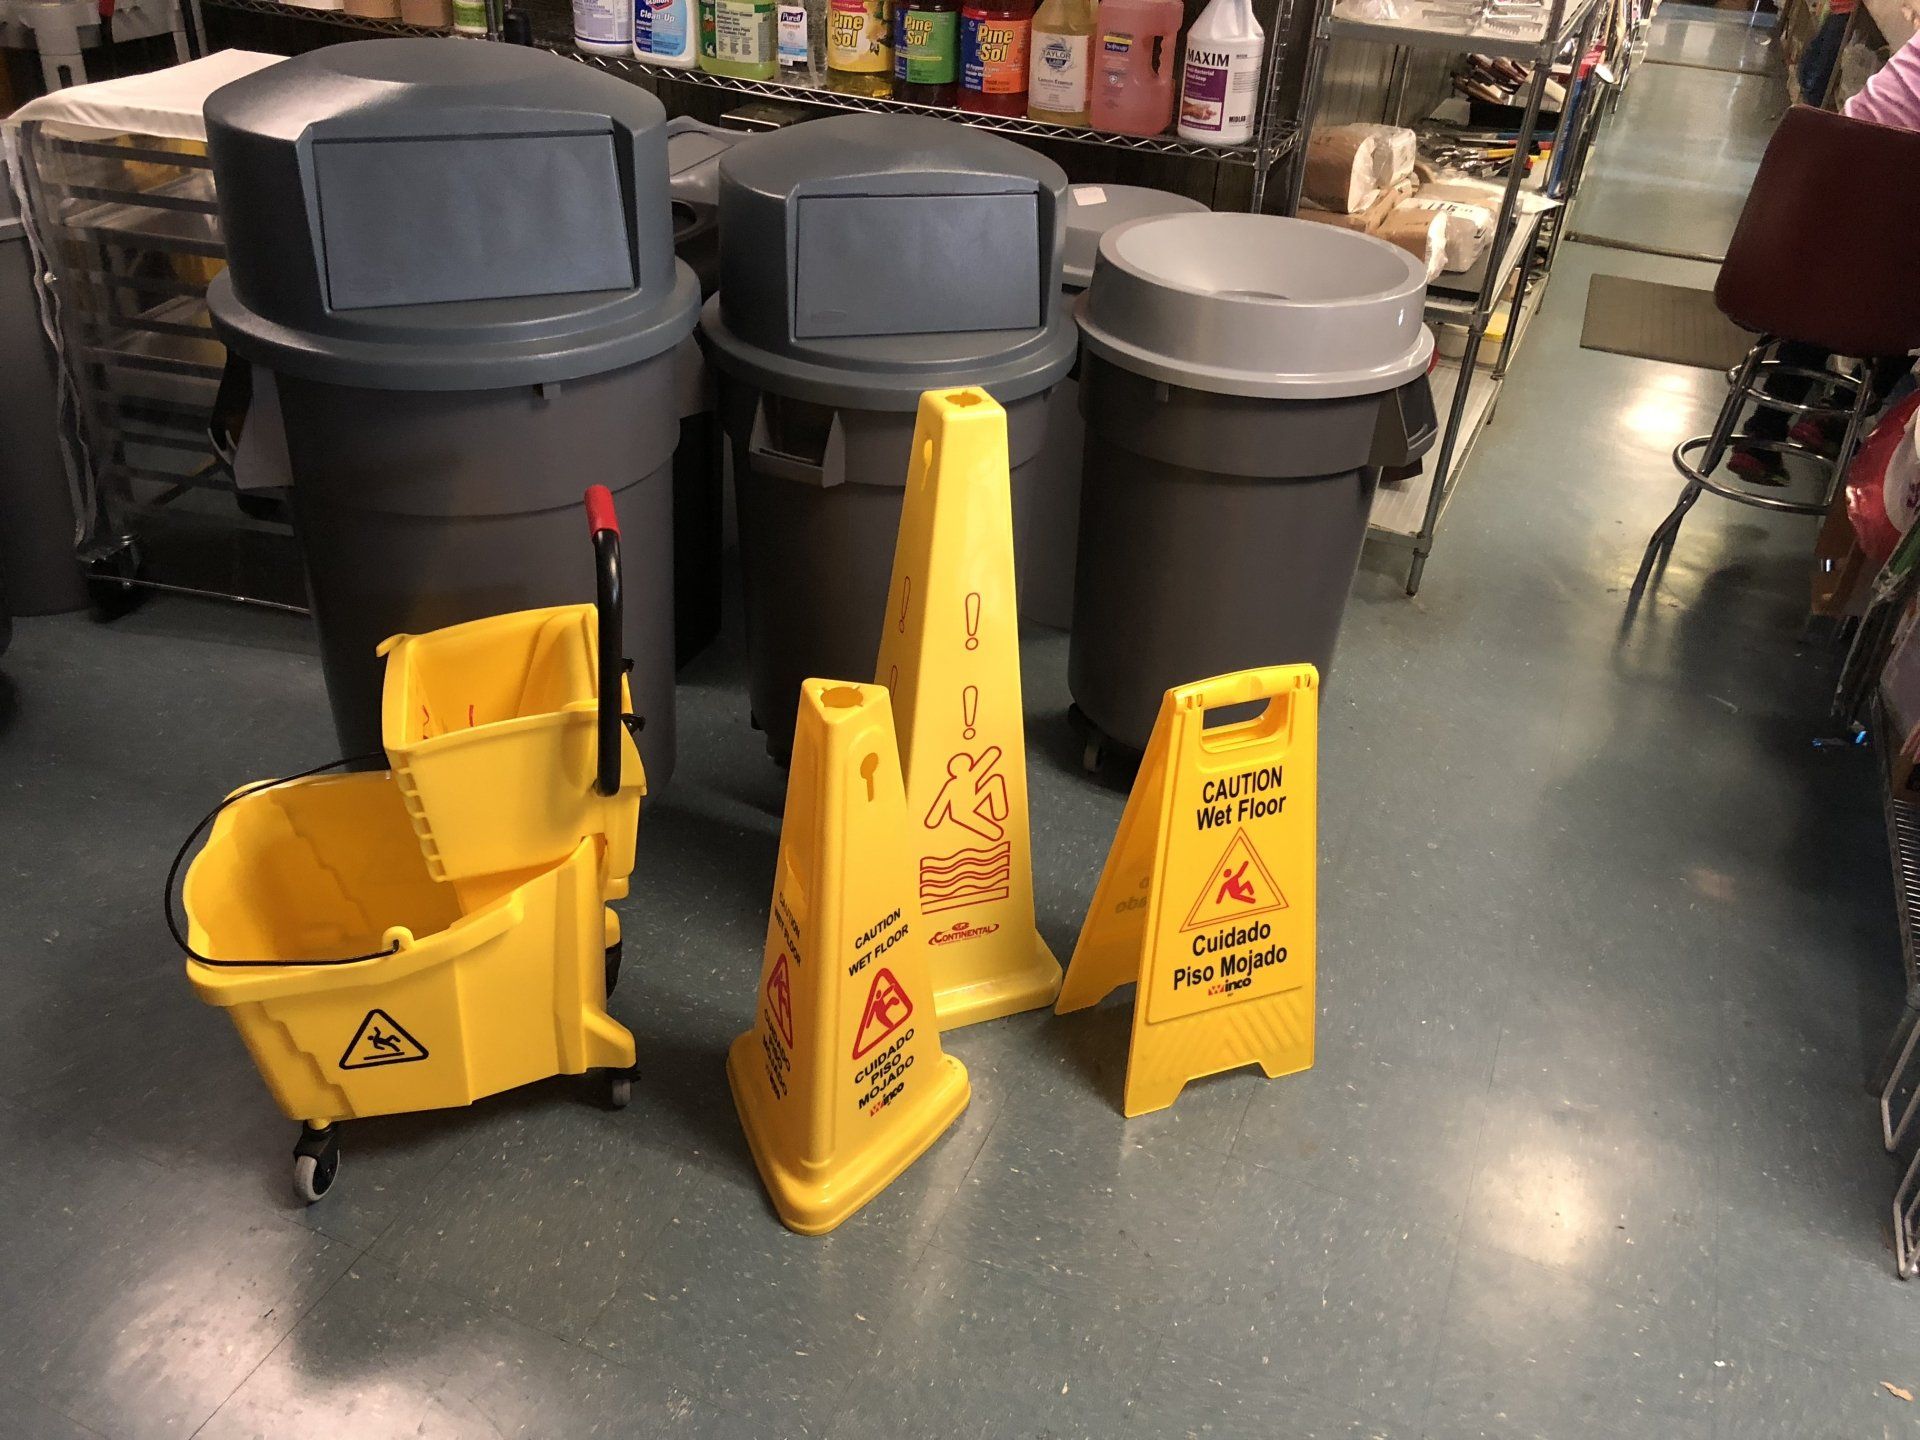 A yellow mop bucket is sitting next to a yellow caution sign